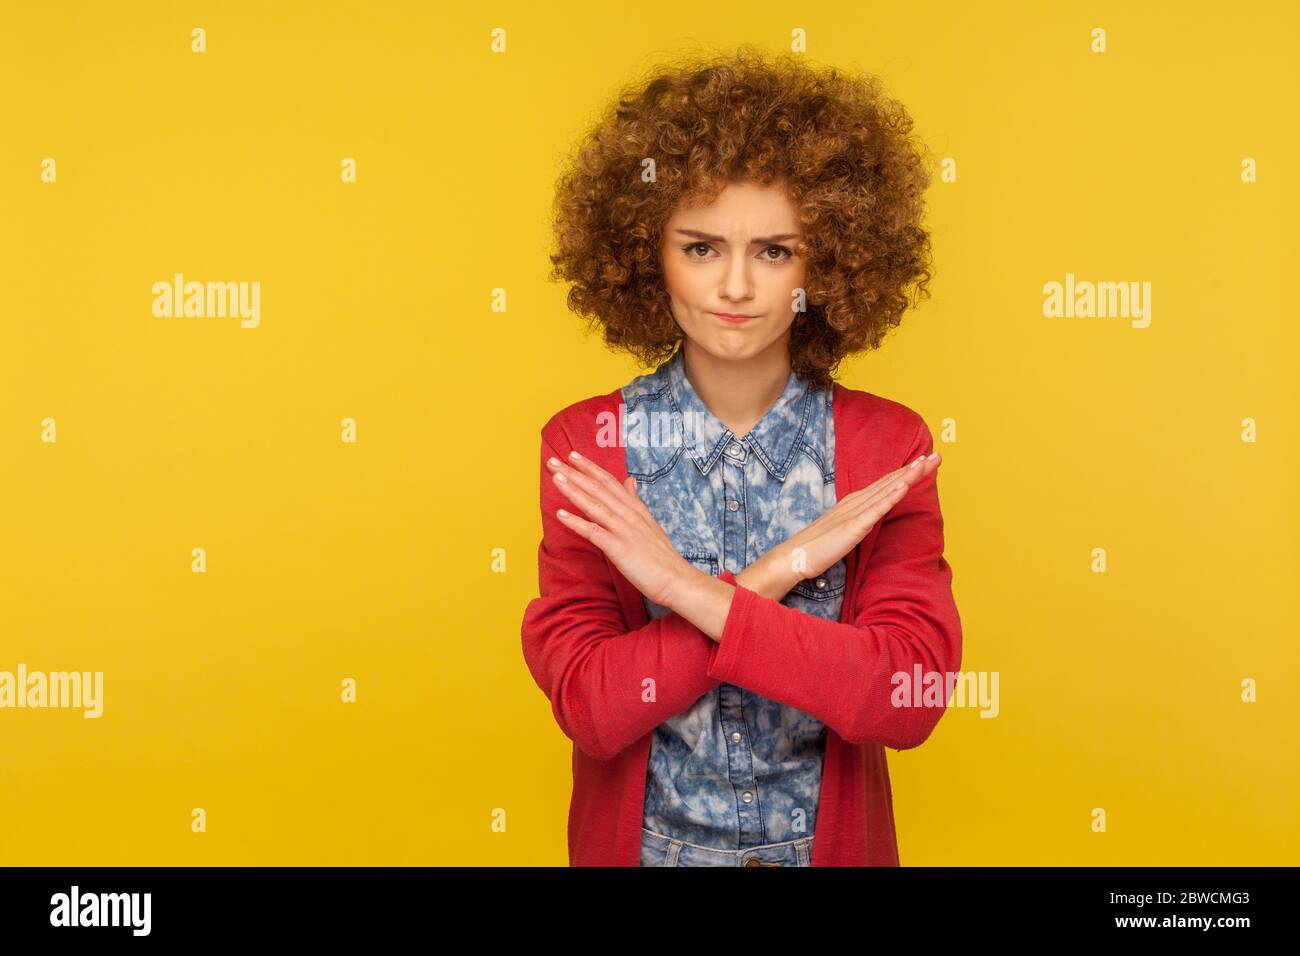 Stop, banned access. Portrait of young curly-haired woman crossing ...